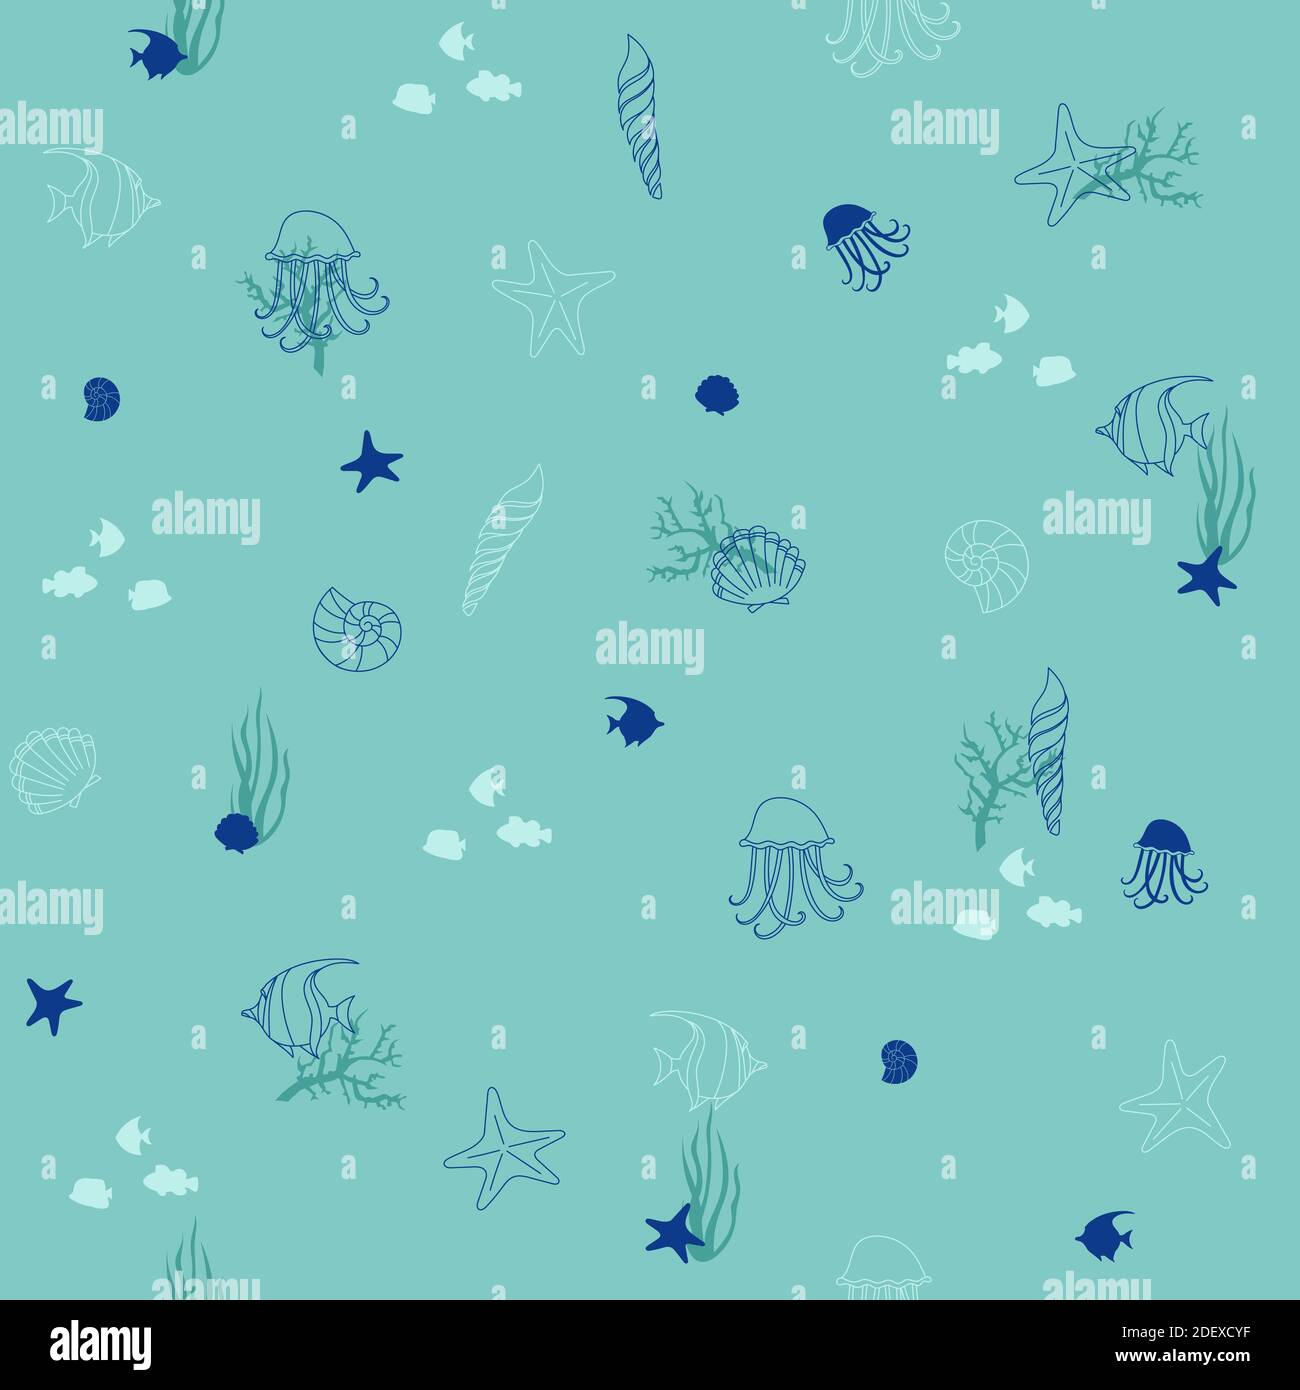 Seamless vector background from hand drawn sea shells and stars. Marine illustration of shellfish, turquoise and blue, with jellyfish, fish and corals Stock Vector